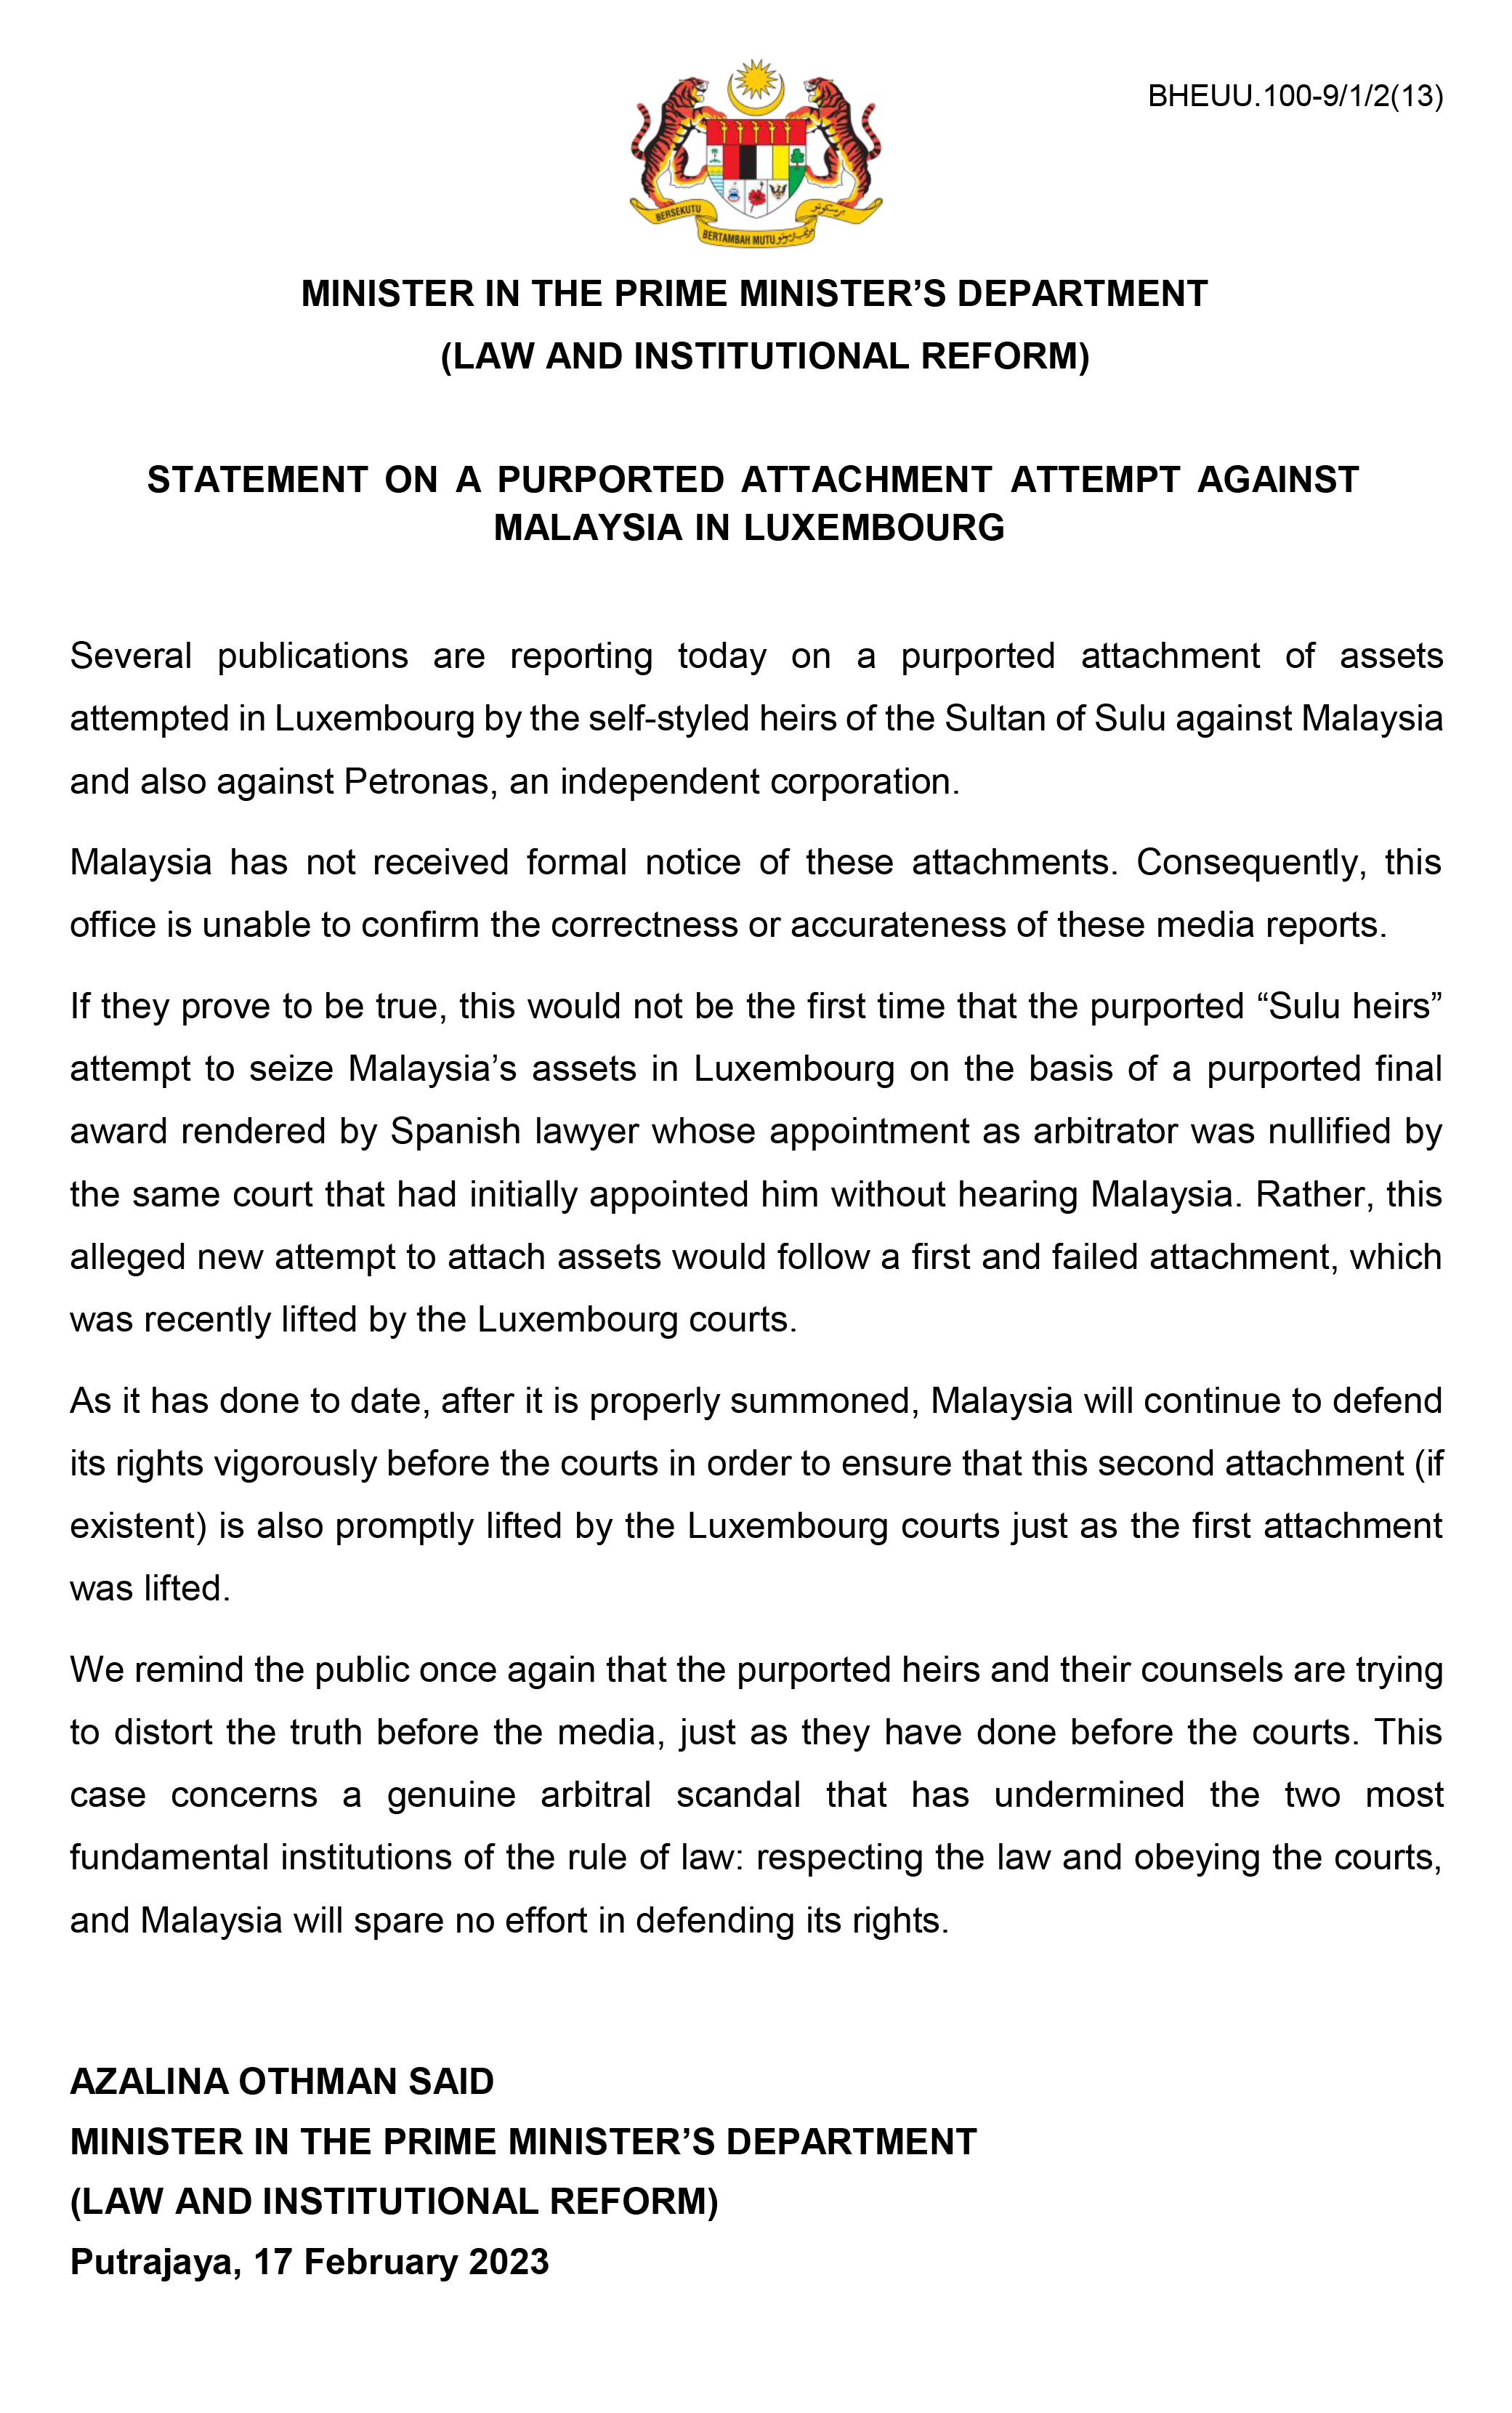 2023.02.17 Statement on the purported attachment of Petronas assets in Luxembourg